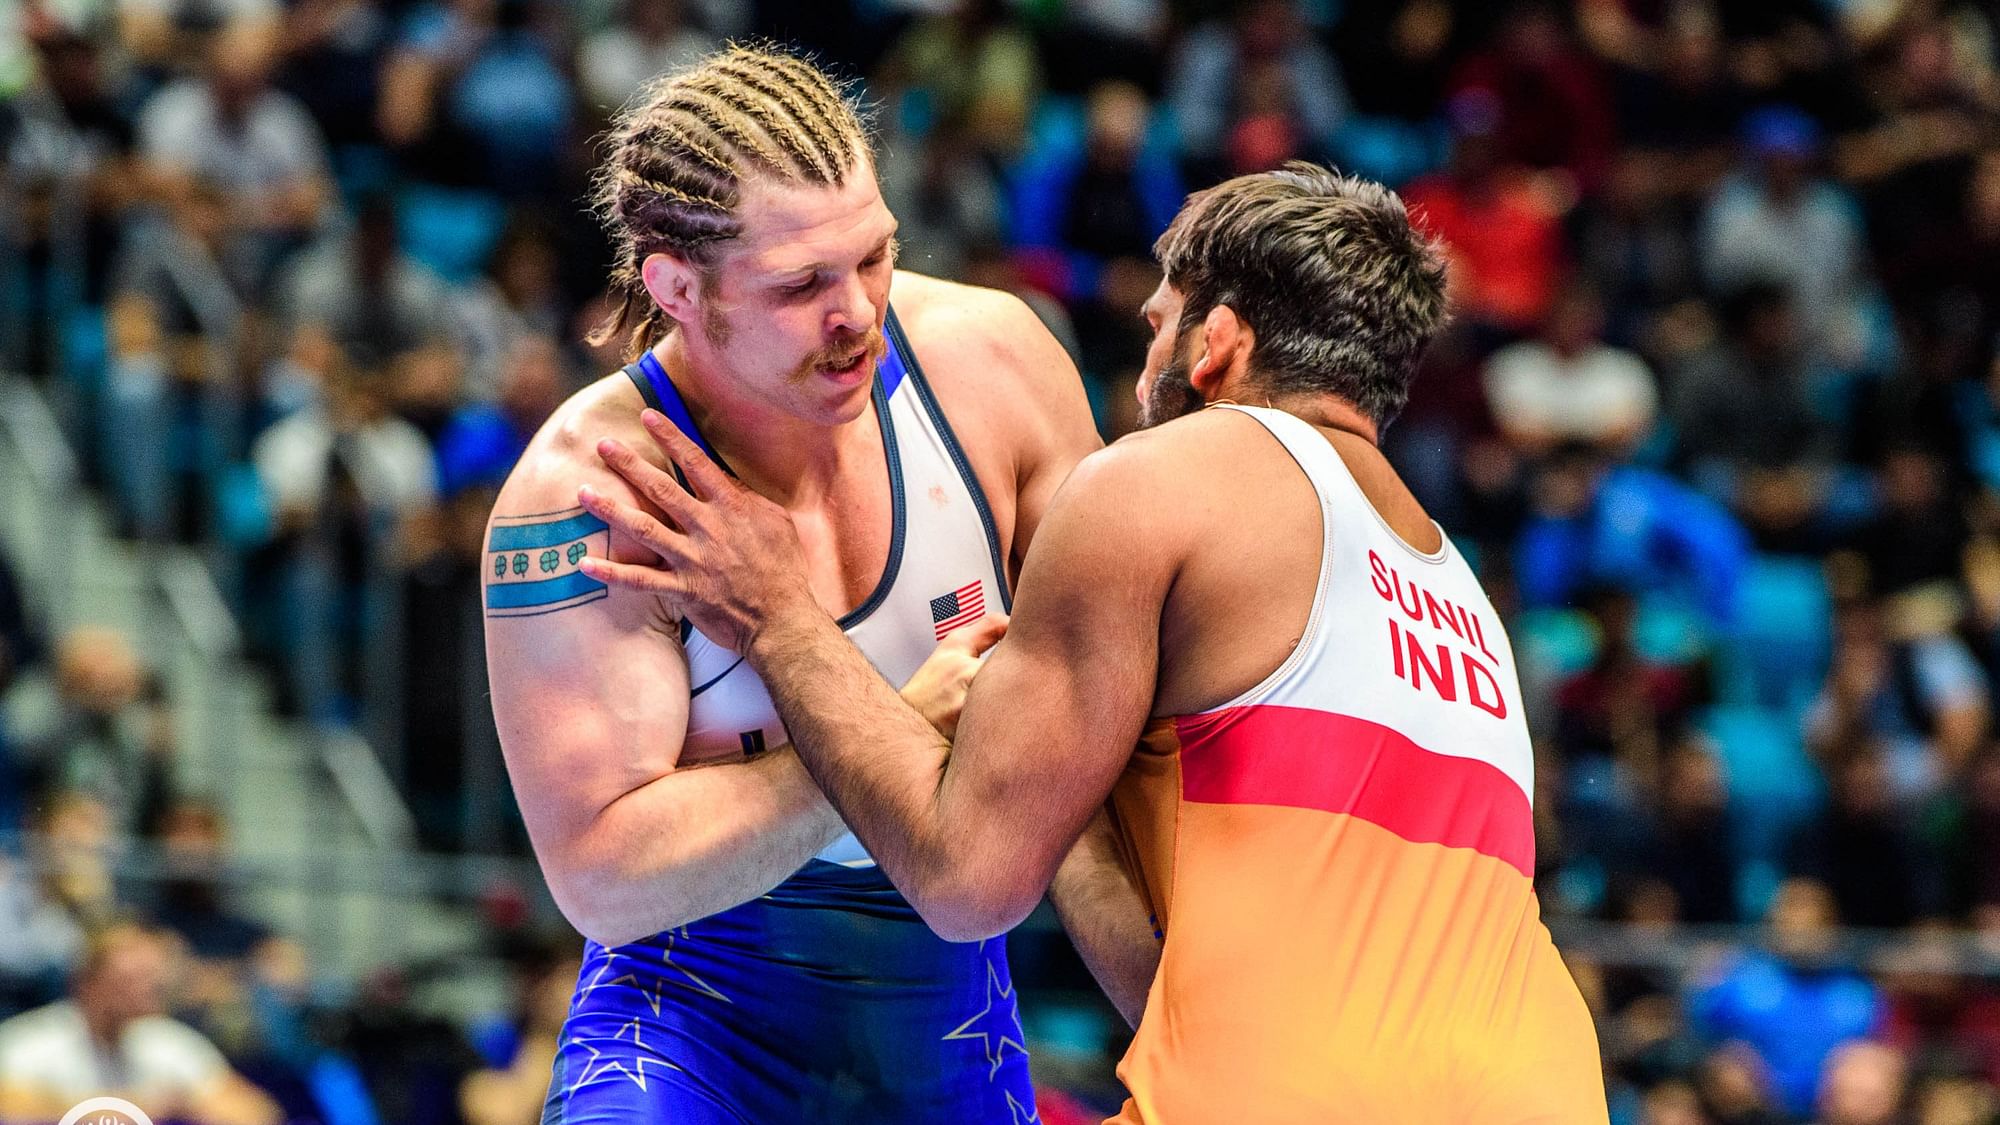 India disappointing campaign at the UWW World Senior Wrestling Championships continued with wrestlers Ravi, Manish and Sunil’s campaigns ending.